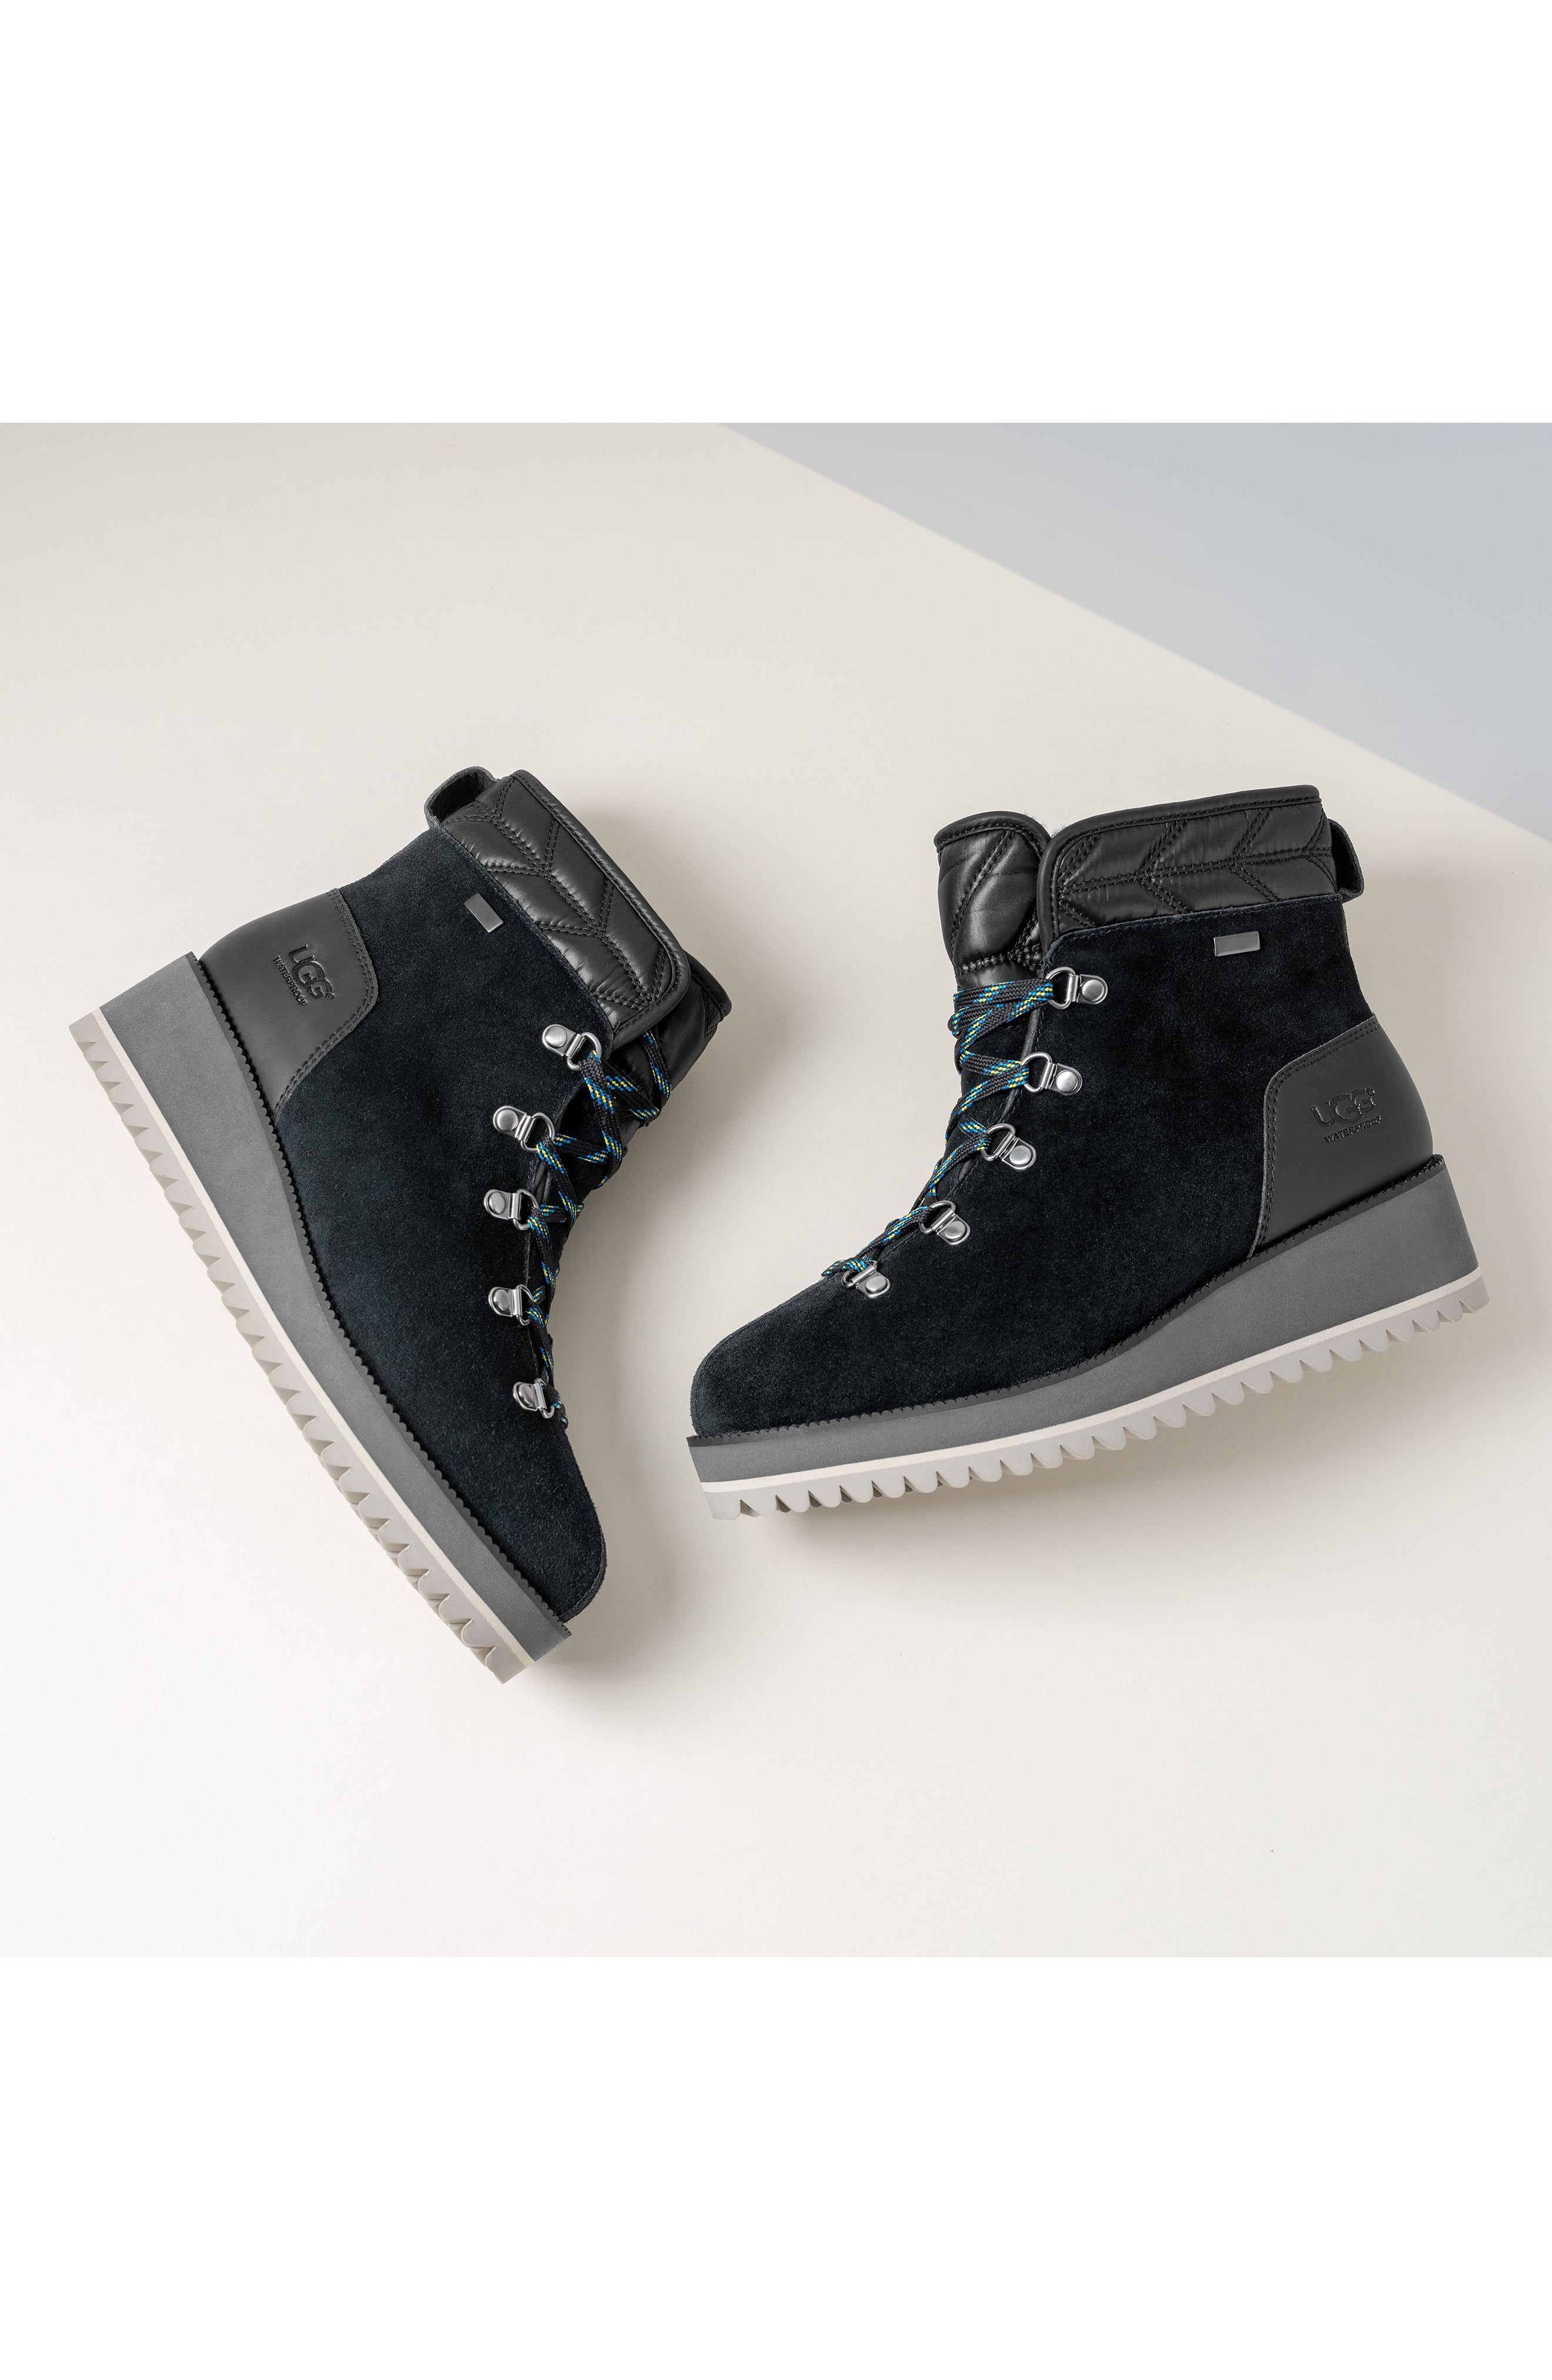 Men's UGG all-weather boots are under 